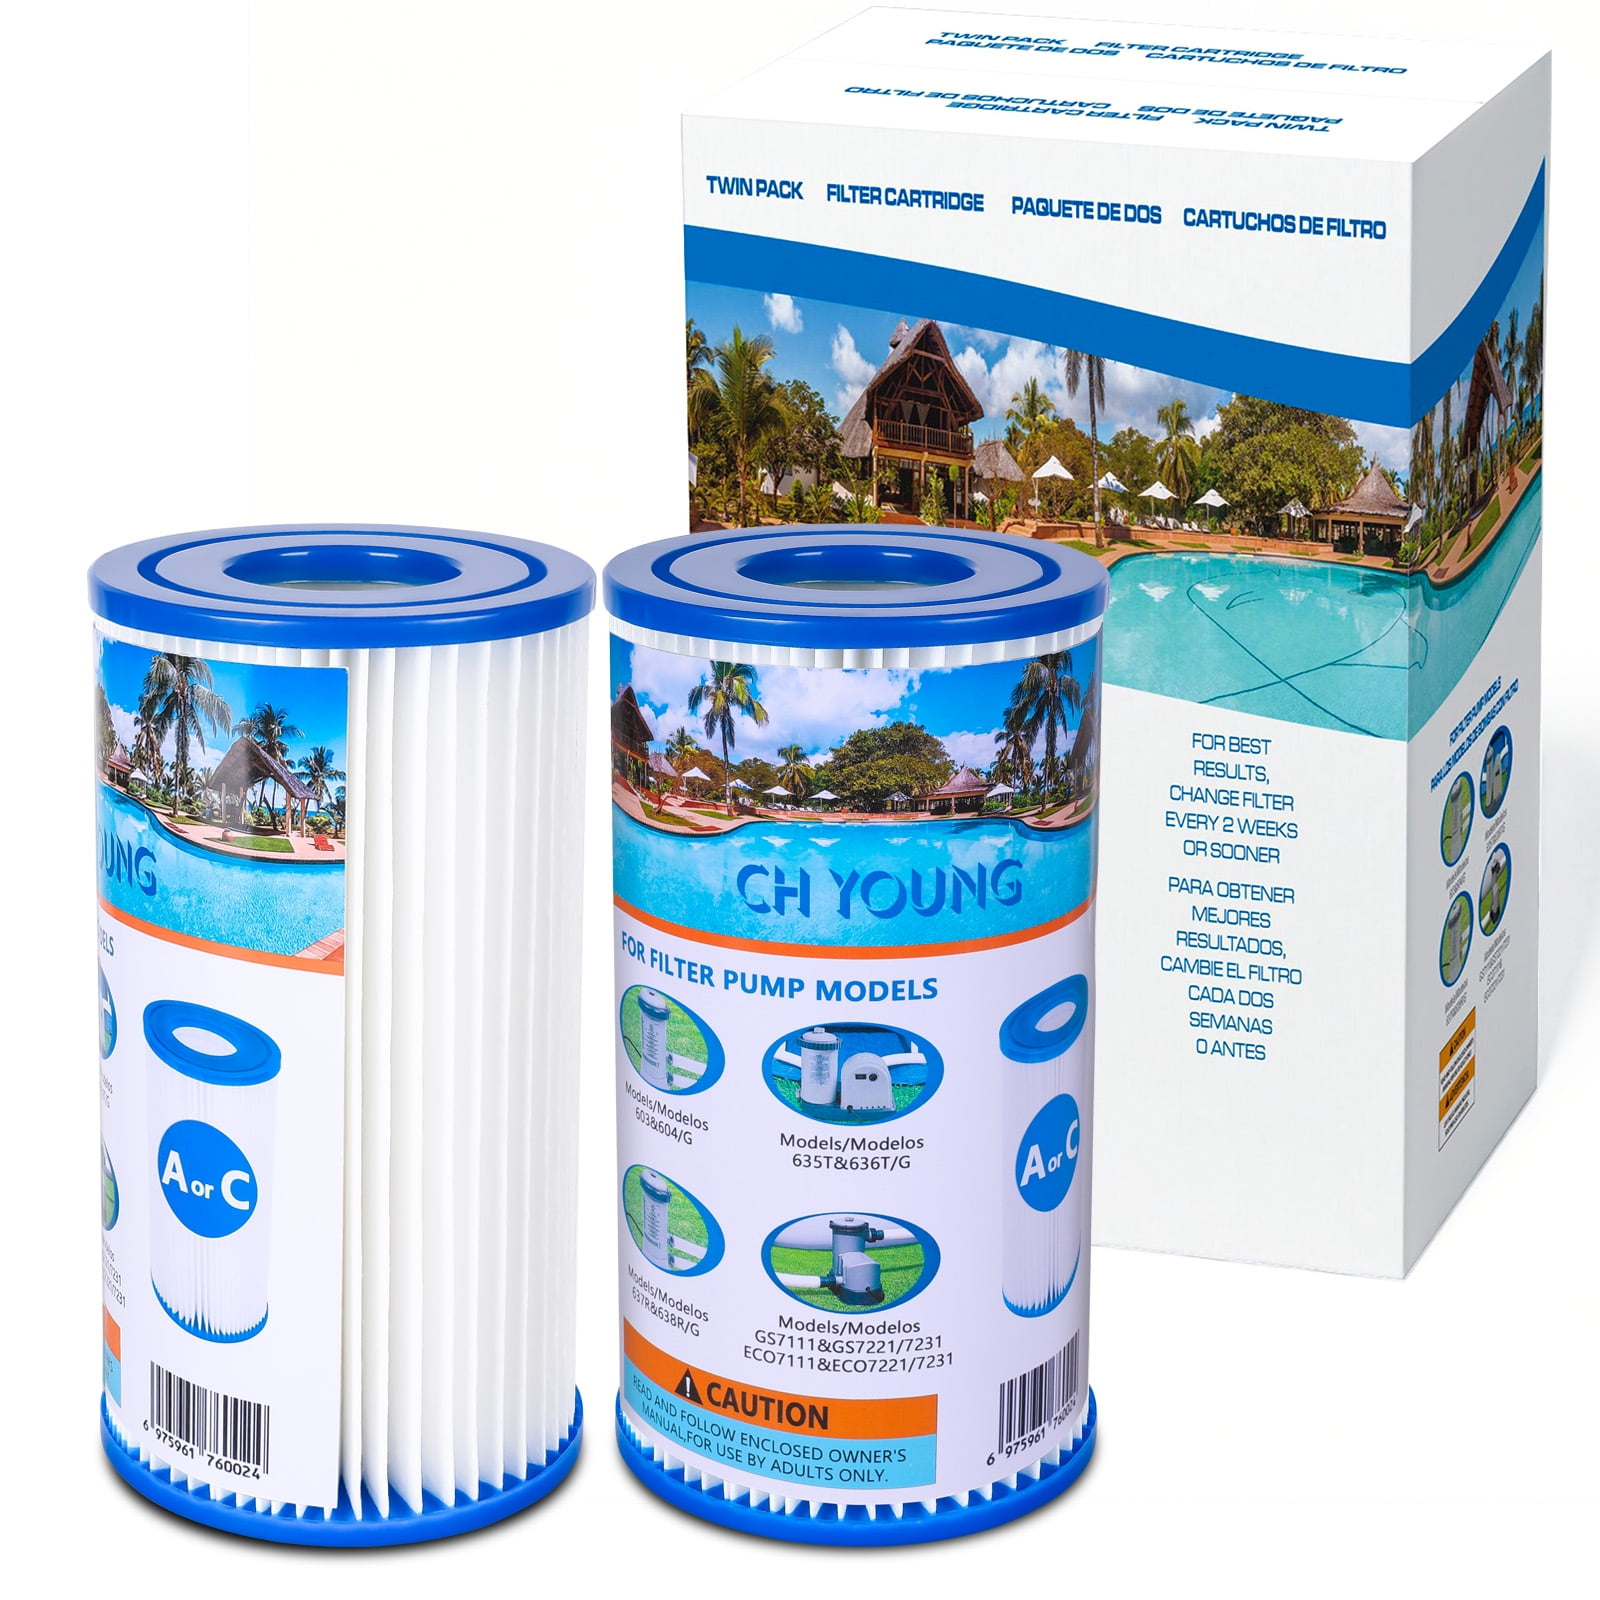 zwaan Sjah Schandelijk Type A/C Pool Filter,Easy to Install Pool Filter Cartridge for Intex Filter  Pump,Made of Acrylic,Re-Useable,Suitable for Inground and Above Ground  Pools,2PCS - Walmart.com